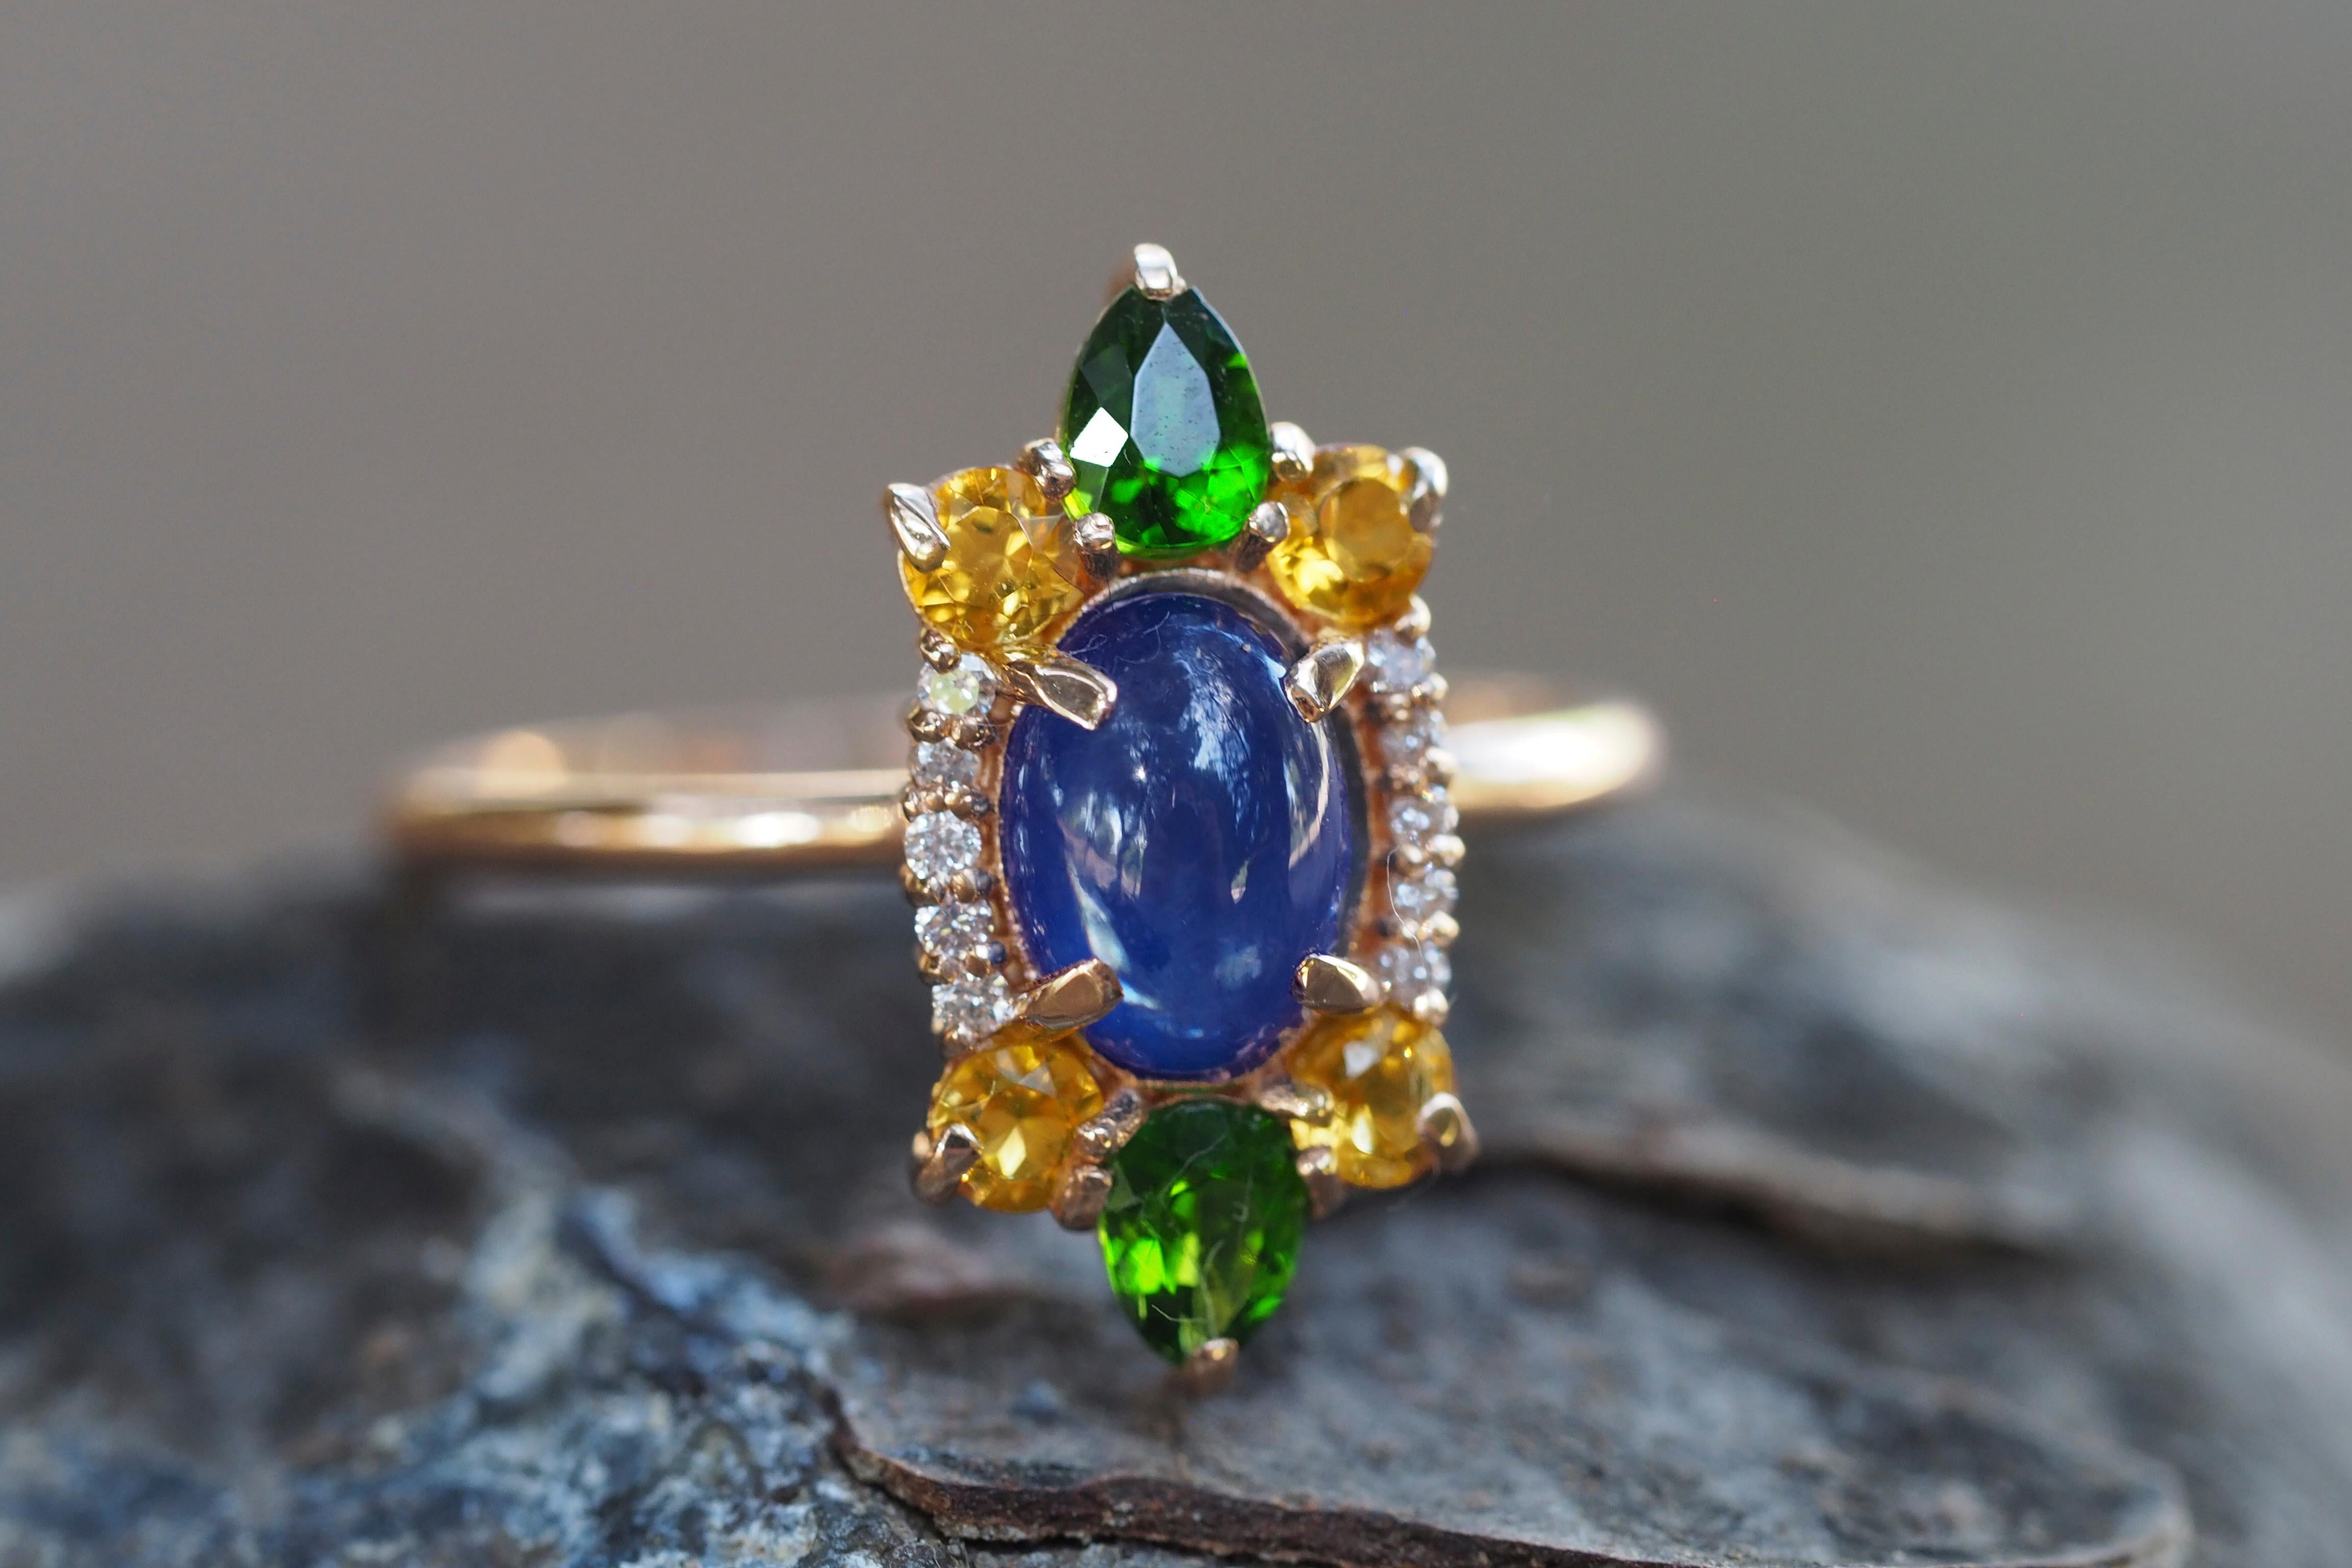 For Sale:  14k Gold Ring with Sapphire, Chrome Diopside and Diamonds 12